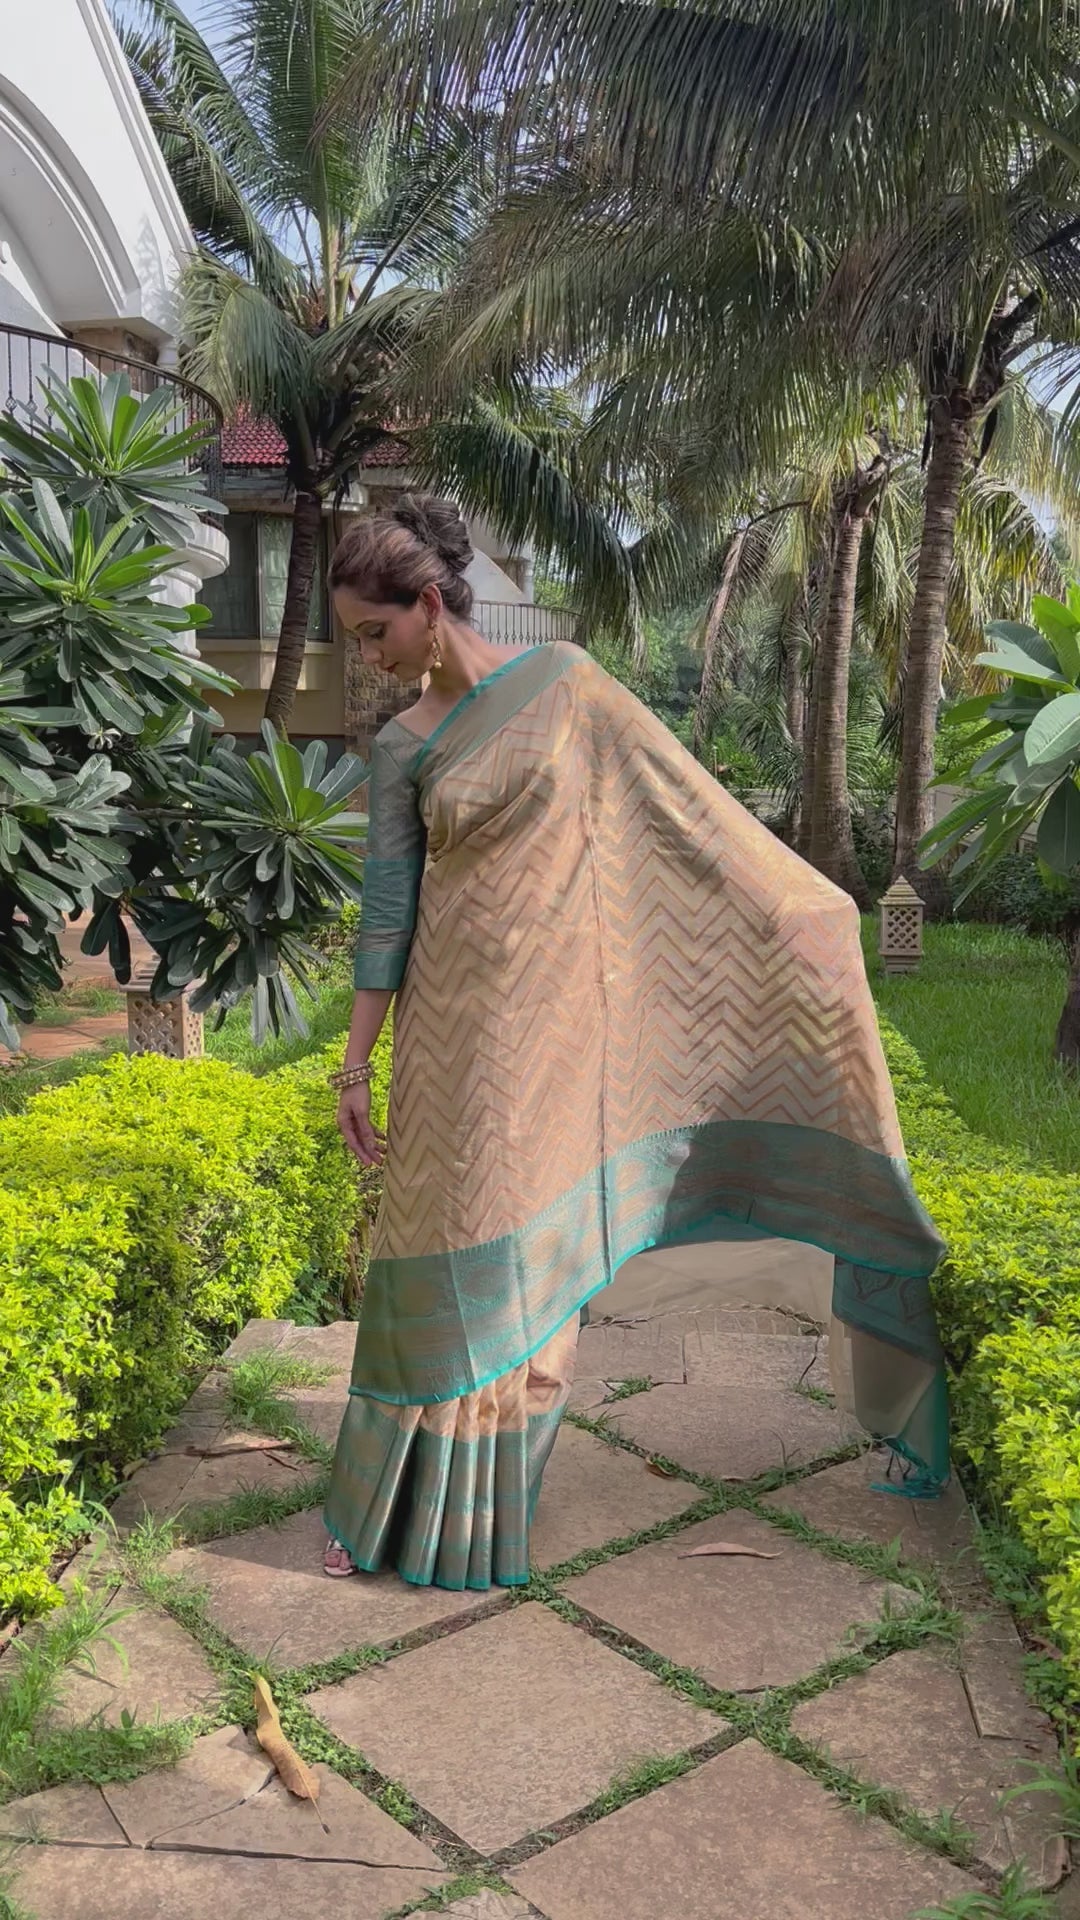 Soft Gold Banarasi Saree Indian Clothing in Denver, CO, Aurora, CO, Boulder, CO, Fort Collins, CO, Colorado Springs, CO, Parker, CO, Highlands Ranch, CO, Cherry Creek, CO, Centennial, CO, and Longmont, CO. NATIONWIDE SHIPPING USA- India Fashion X